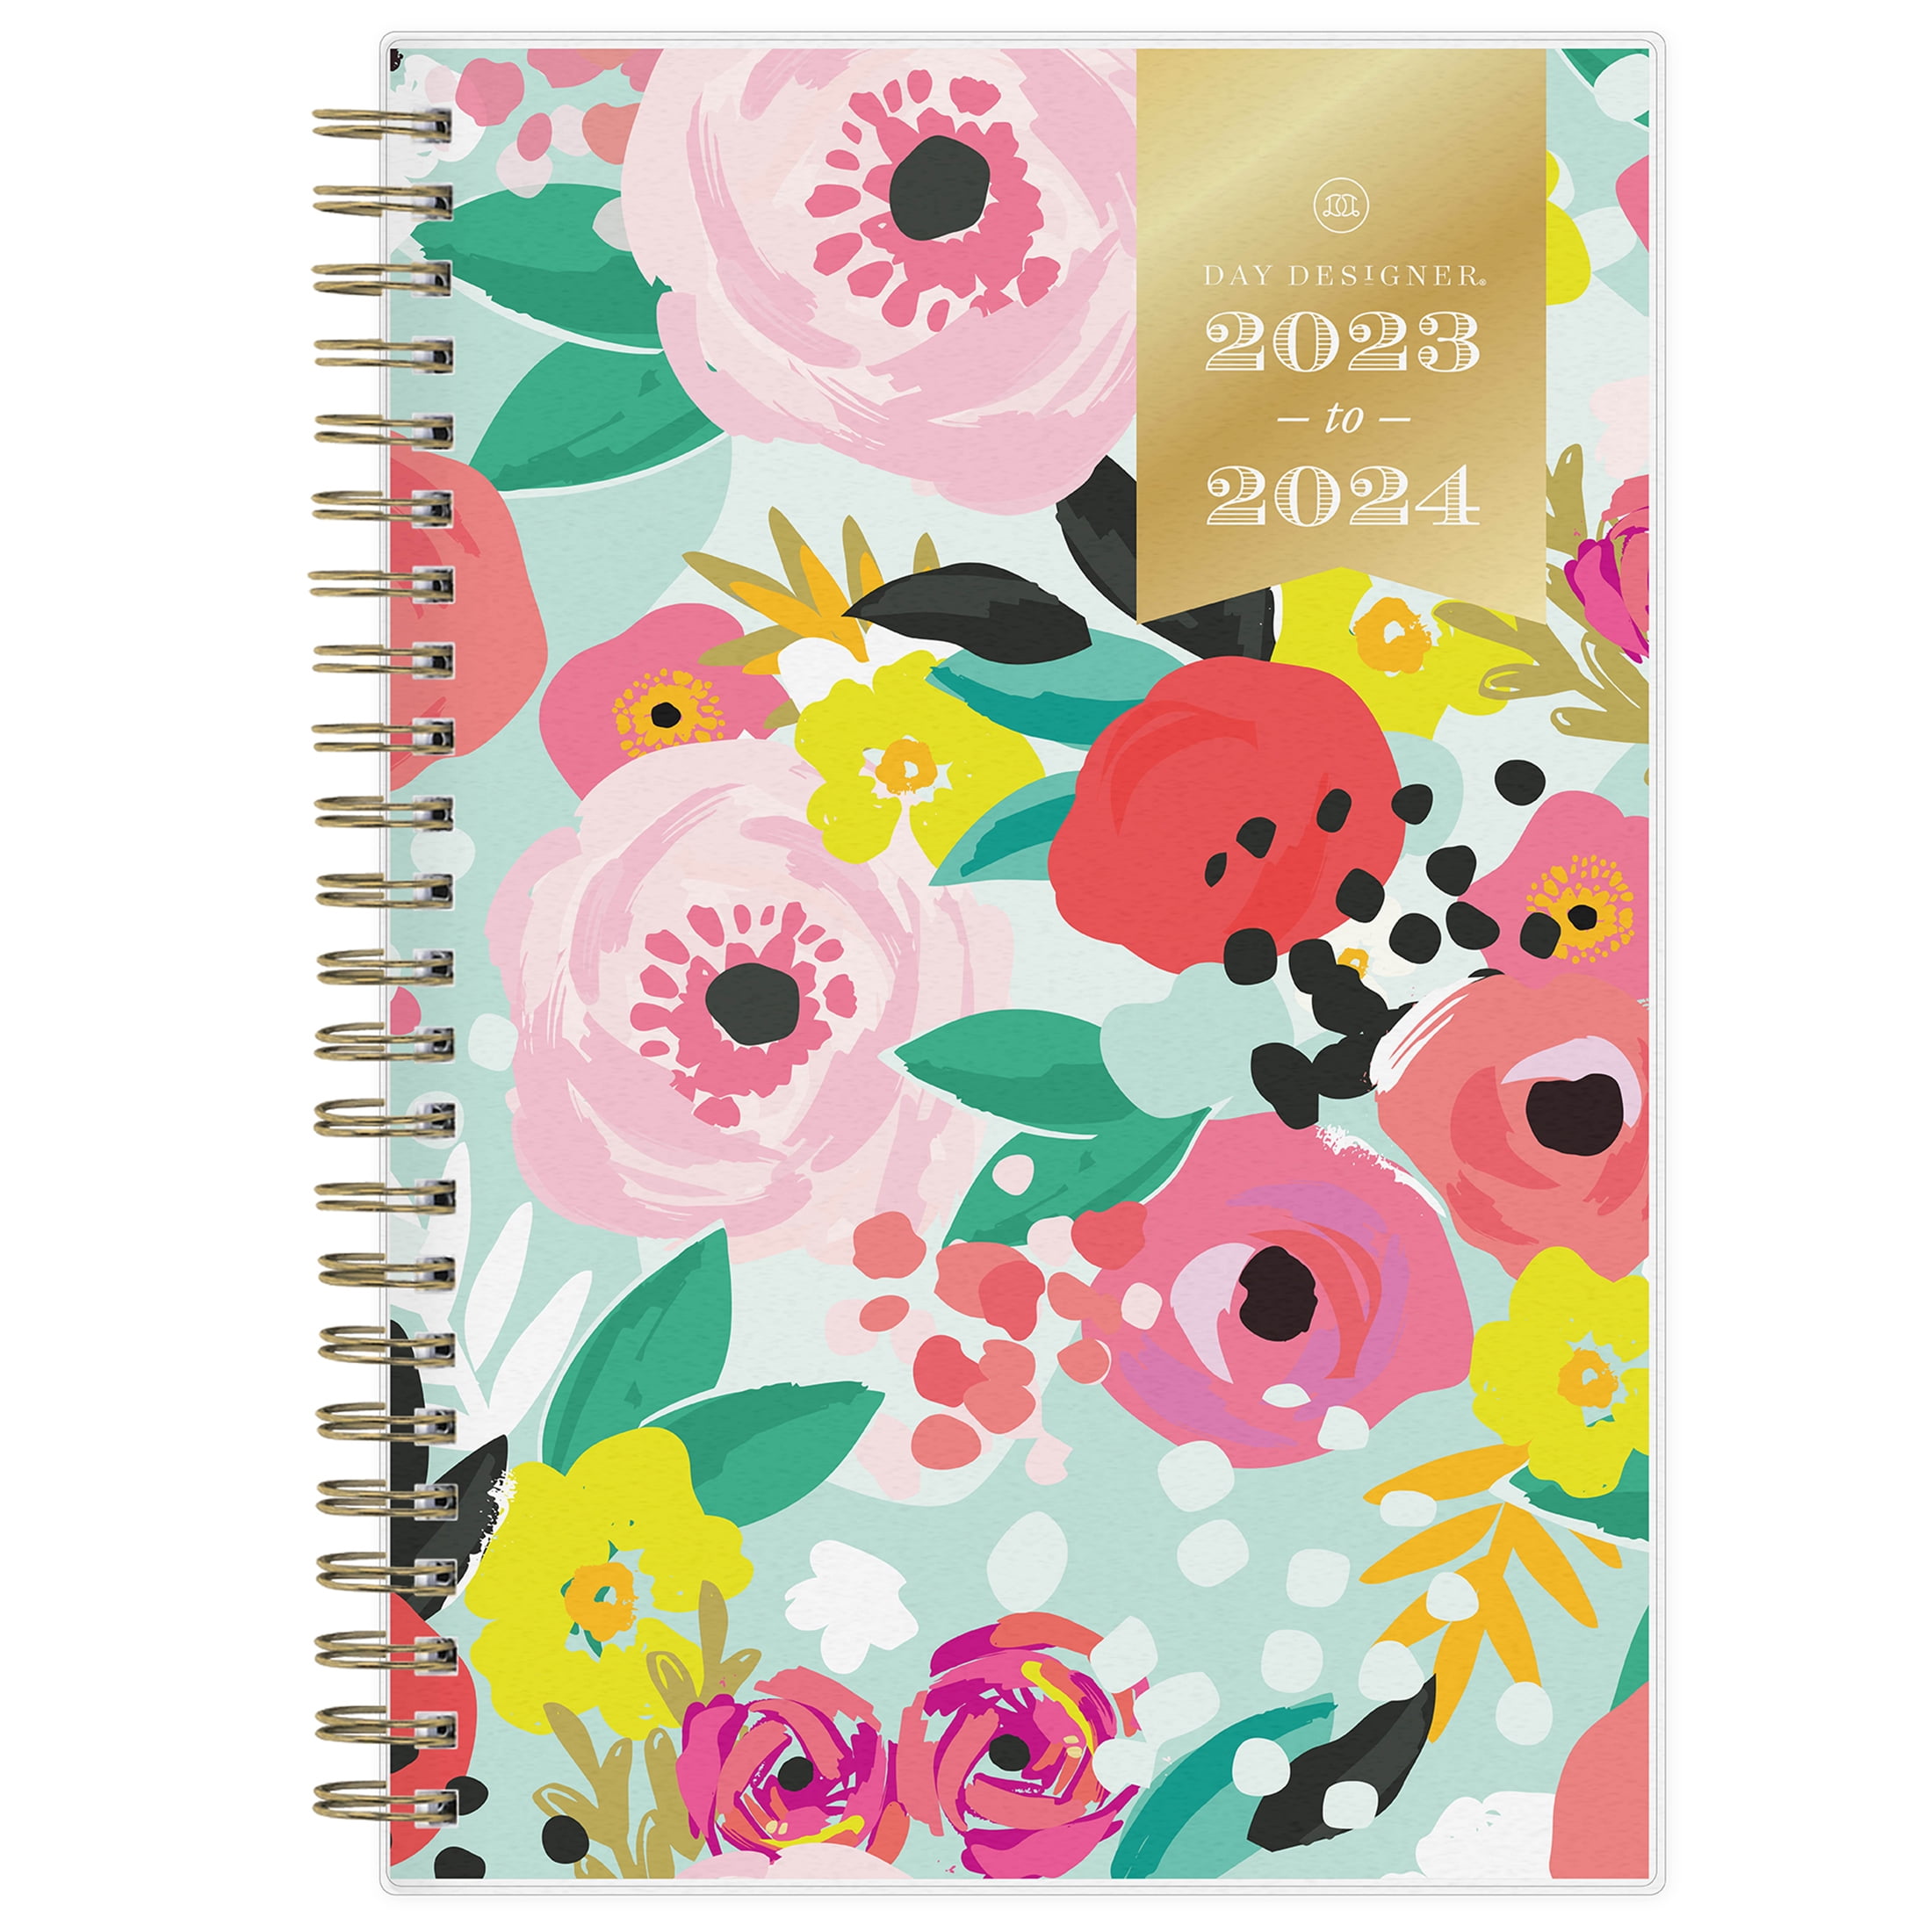 2023-2024 Day Designer Weekly/Monthly Planner, 5-7/8 x 8-5/8, Climbing Floral Mint Frosted, July 2023 to June 2024, 137884-A